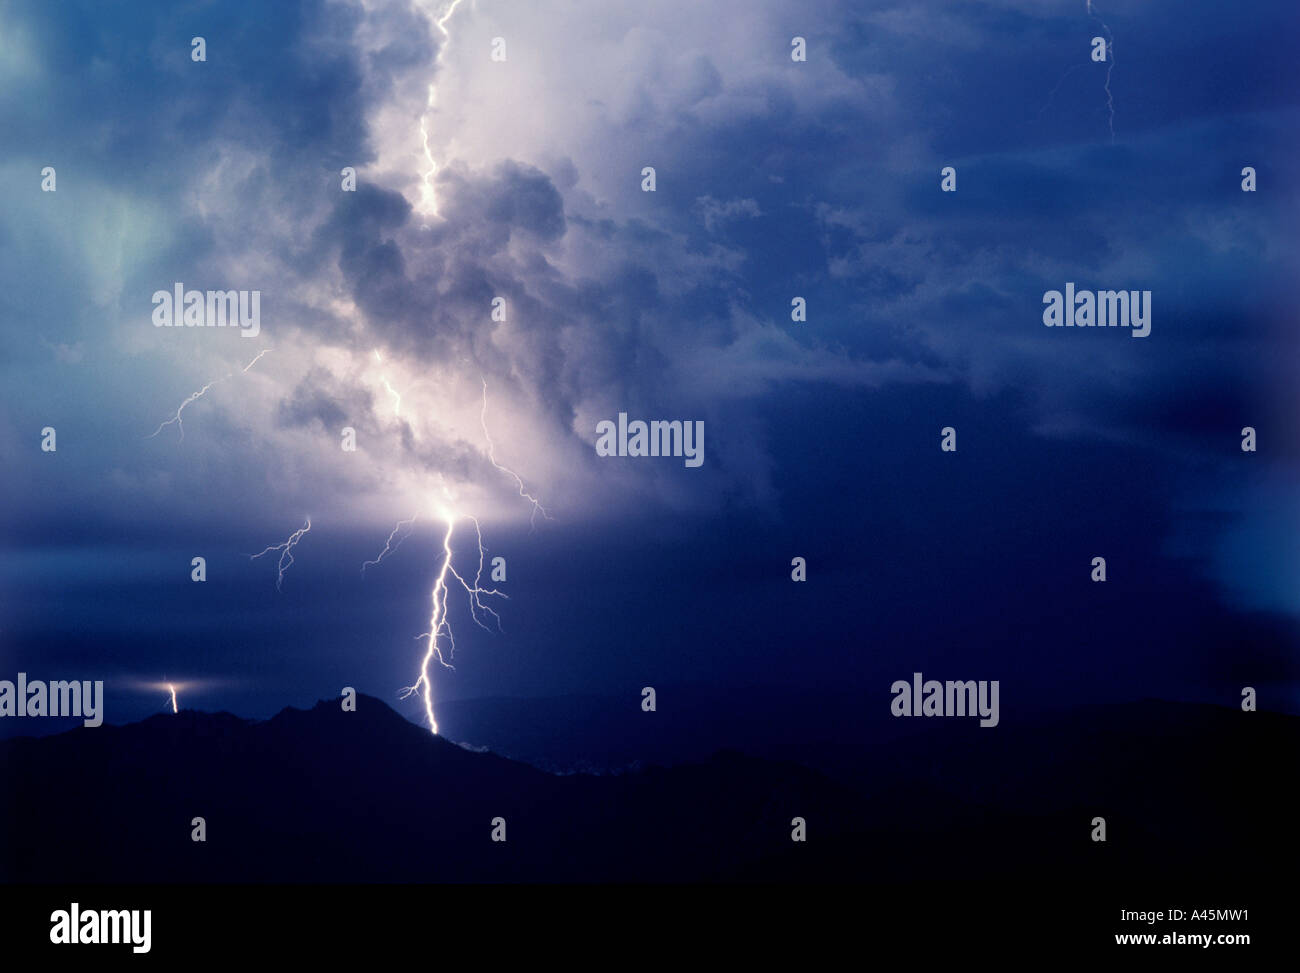 Lightning  strikes against a stormy dark blue sky over the silhouette of mountains in Southern Arizona USA. Stock Photo